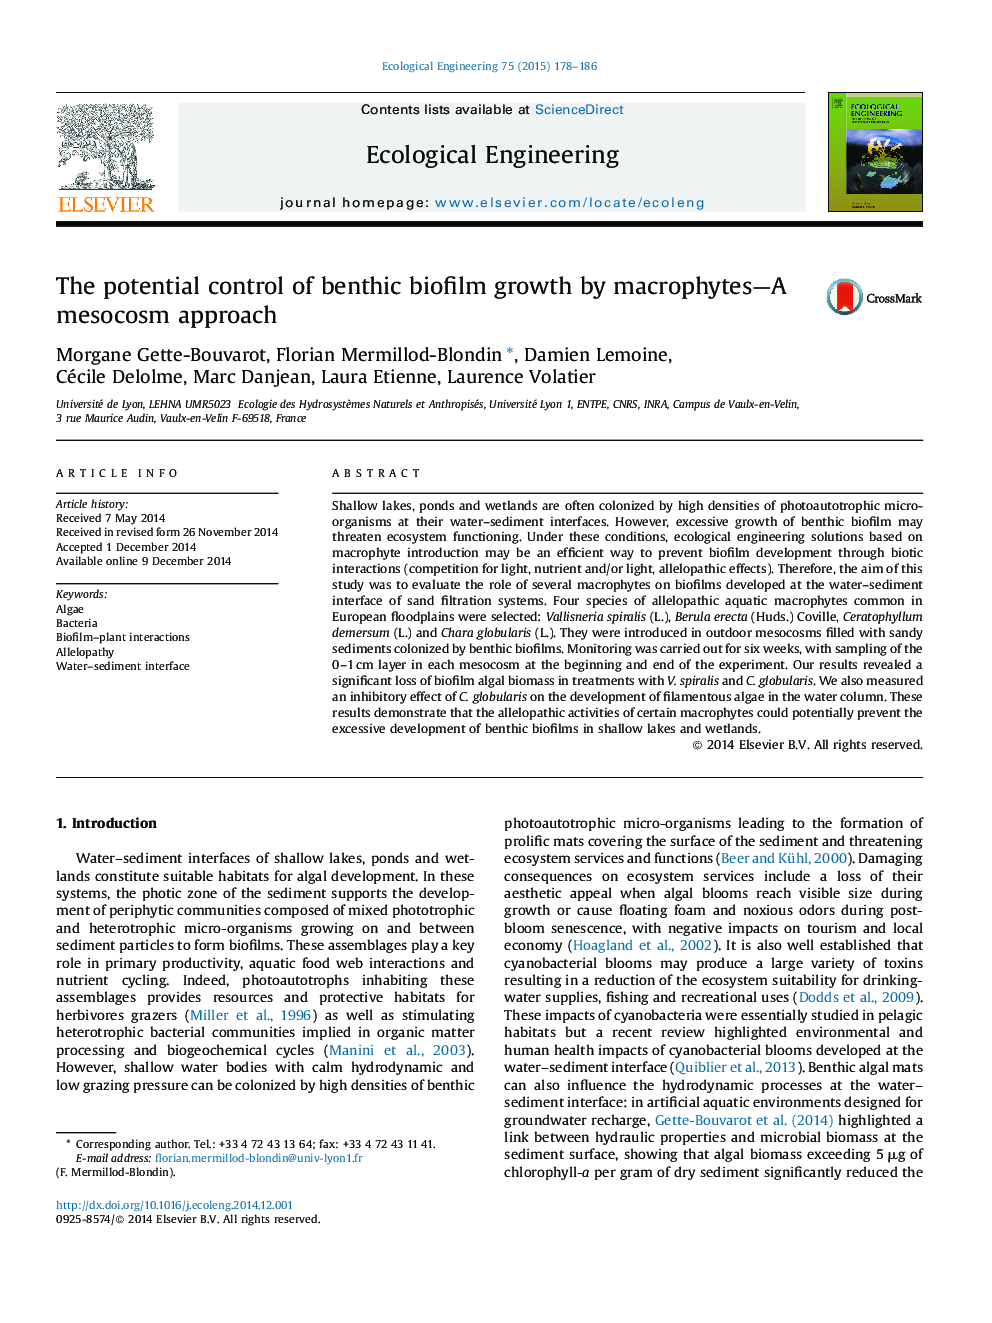 The potential control of benthic biofilm growth by macrophytes-A mesocosm approach